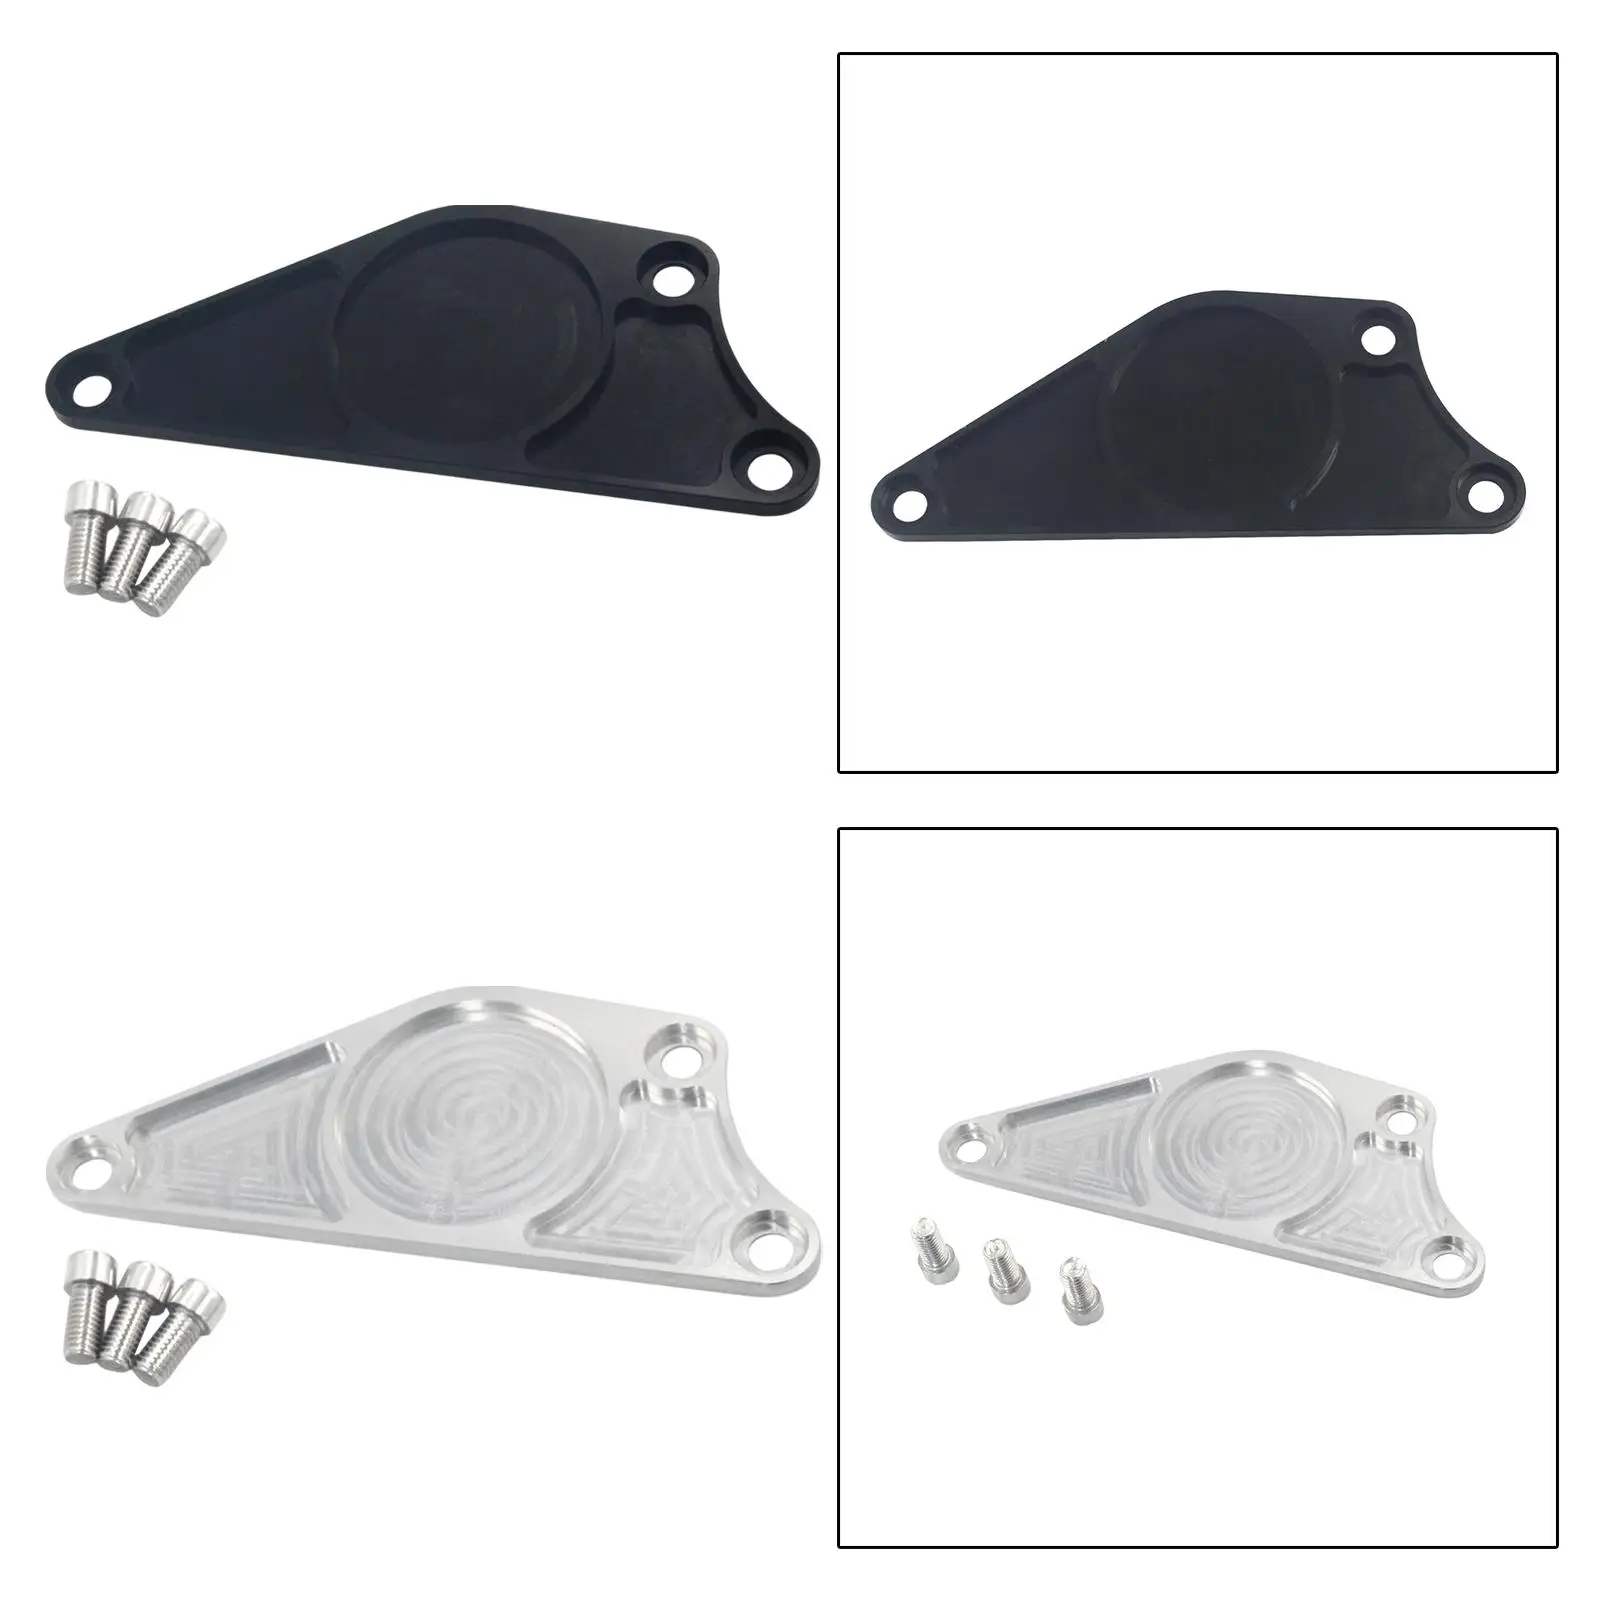 Billet cam Plate for Subaru BRZ Billet cam Plate Cover Precision Works Durable Easy Installation Car Accessories Camshaft Plate